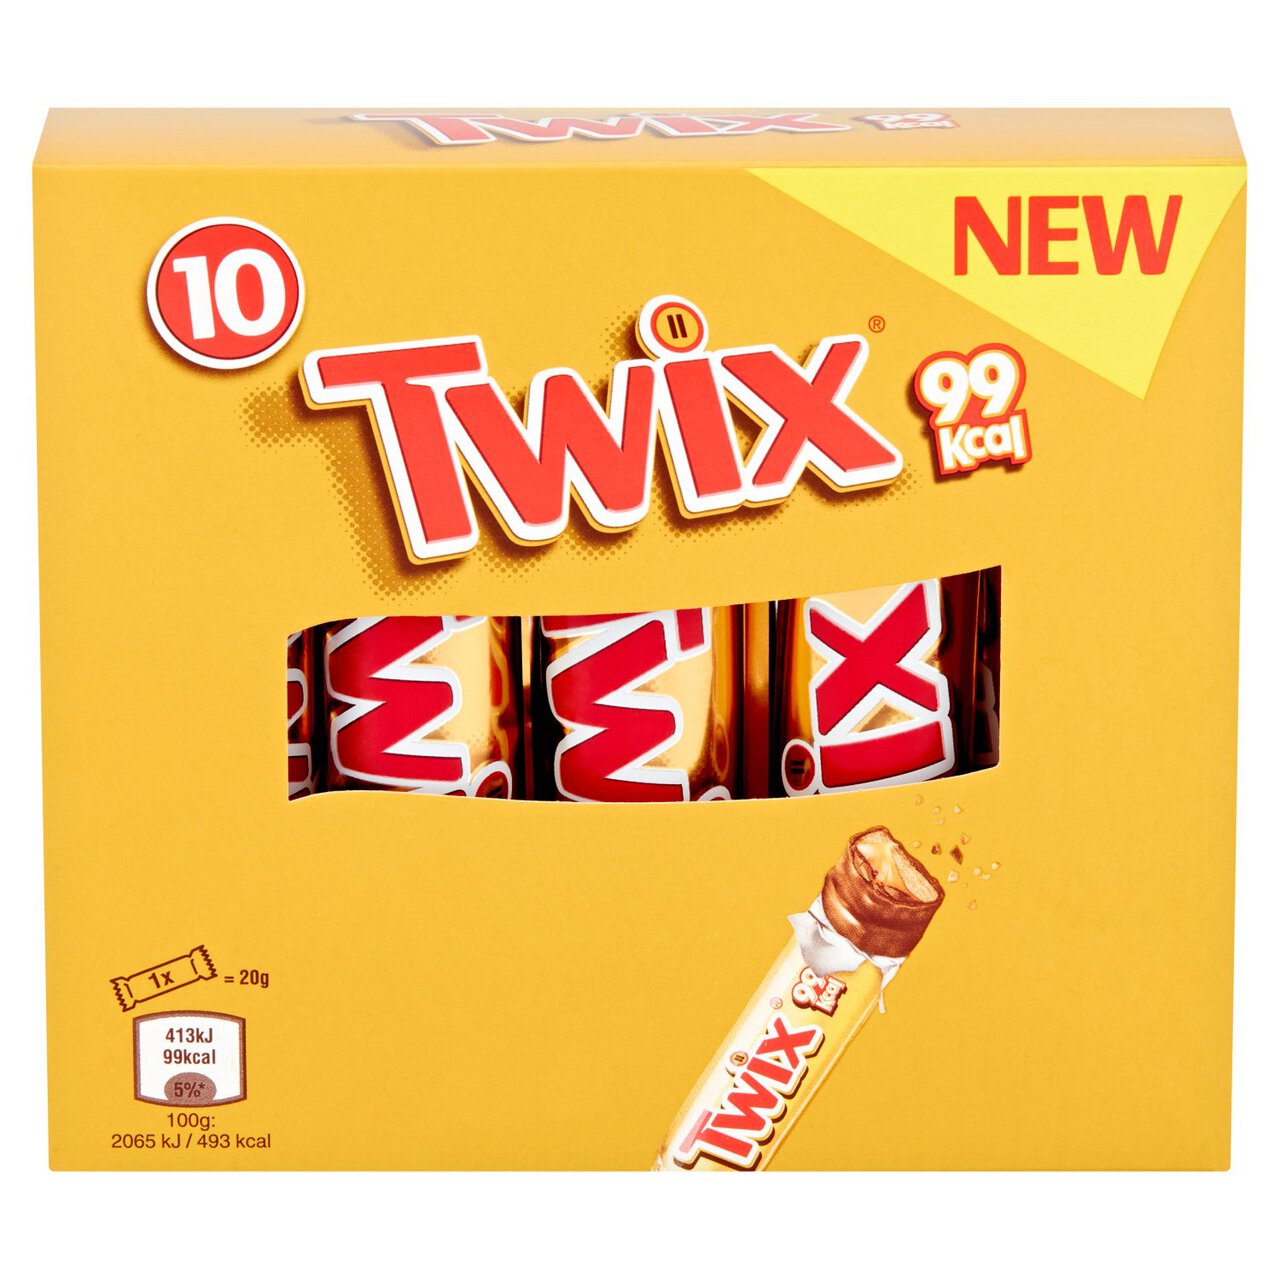 Twix 99Kcal Caramel, Biscuit & Milk Chocolate Fingers Snack Bars Multipack 10 x 20g